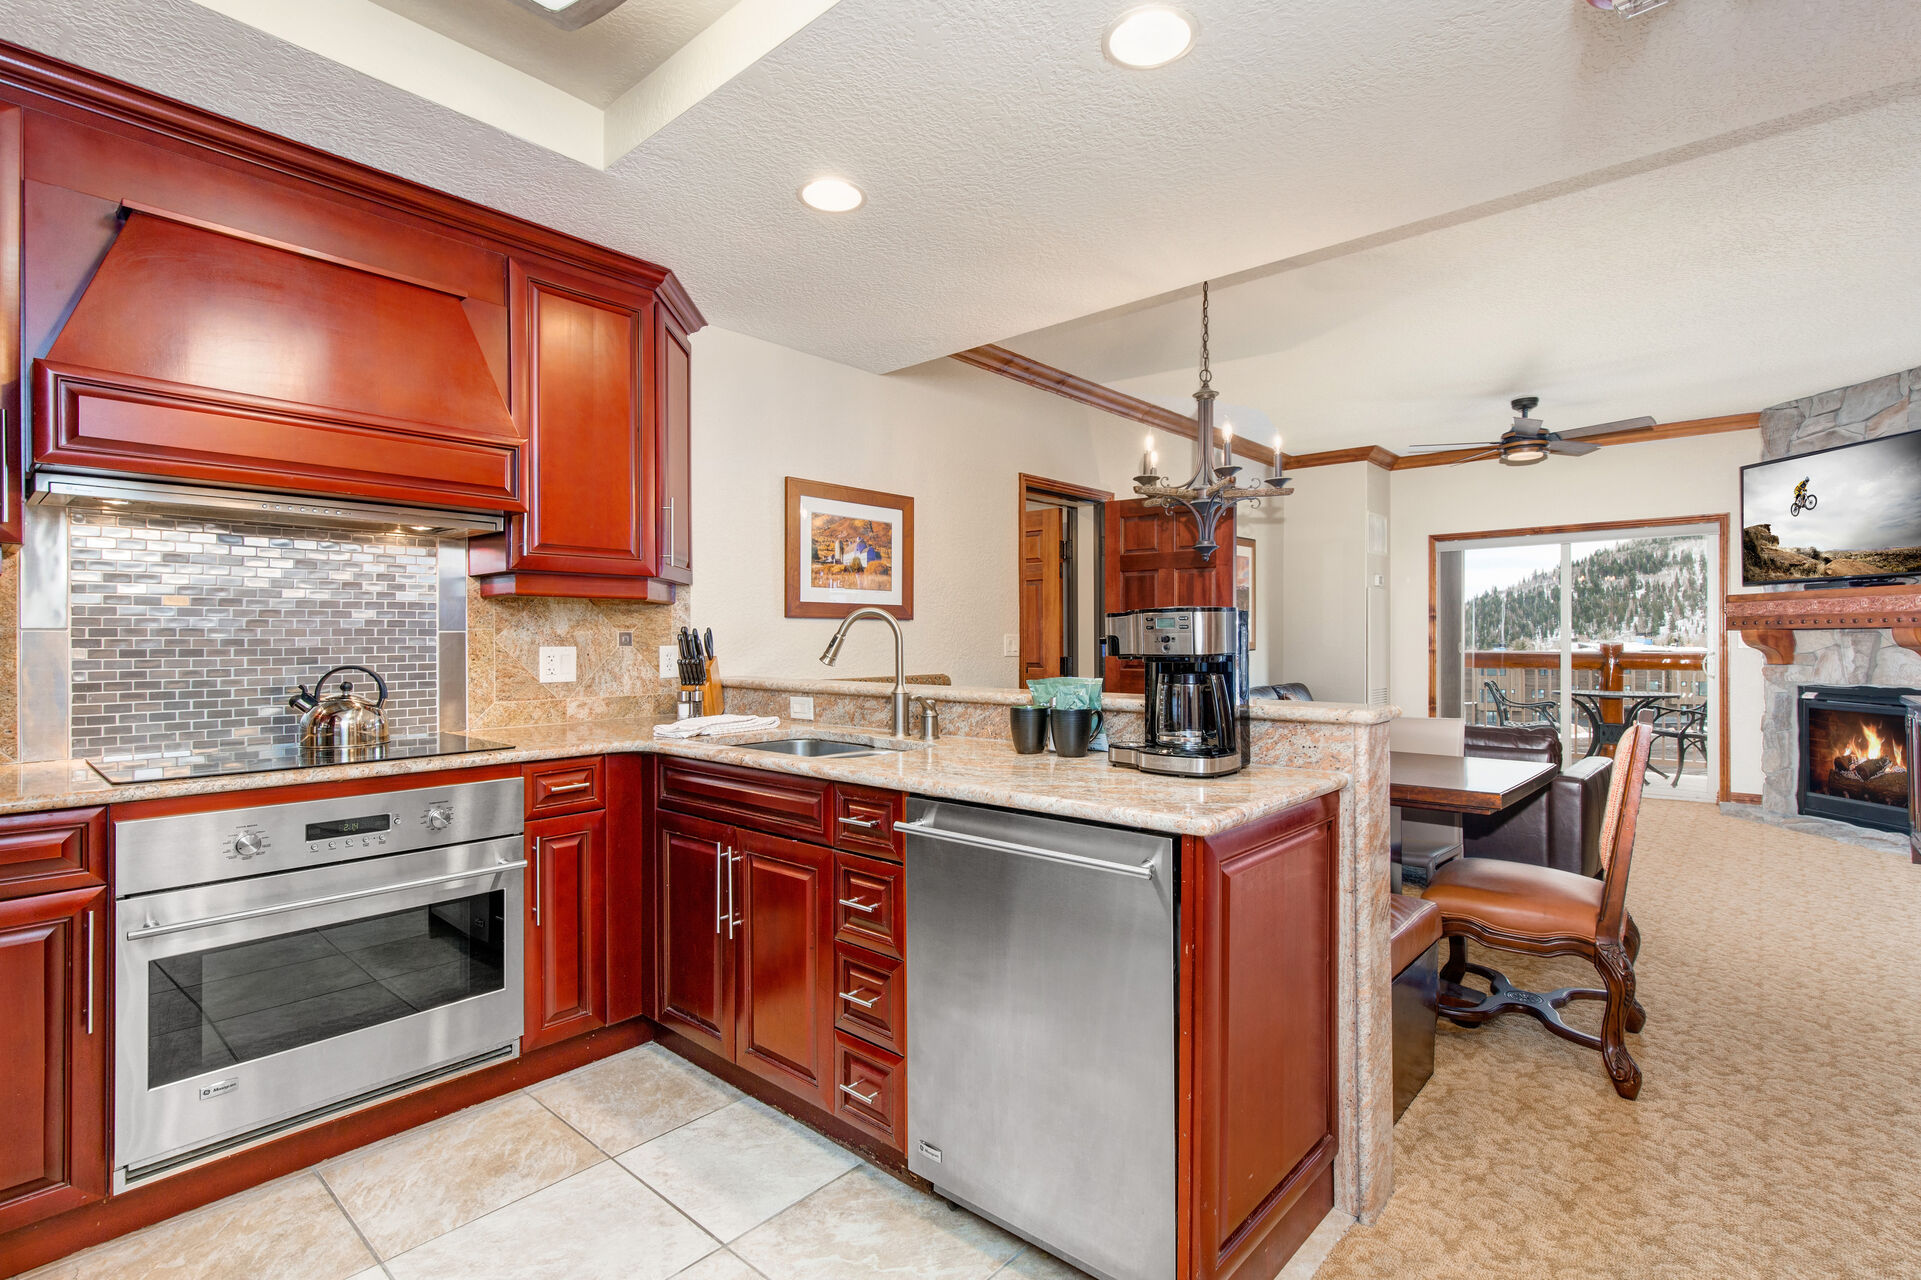 Side A Fully Equipped Kitchen with stone countertops, stainless steel appliances, and ice maker